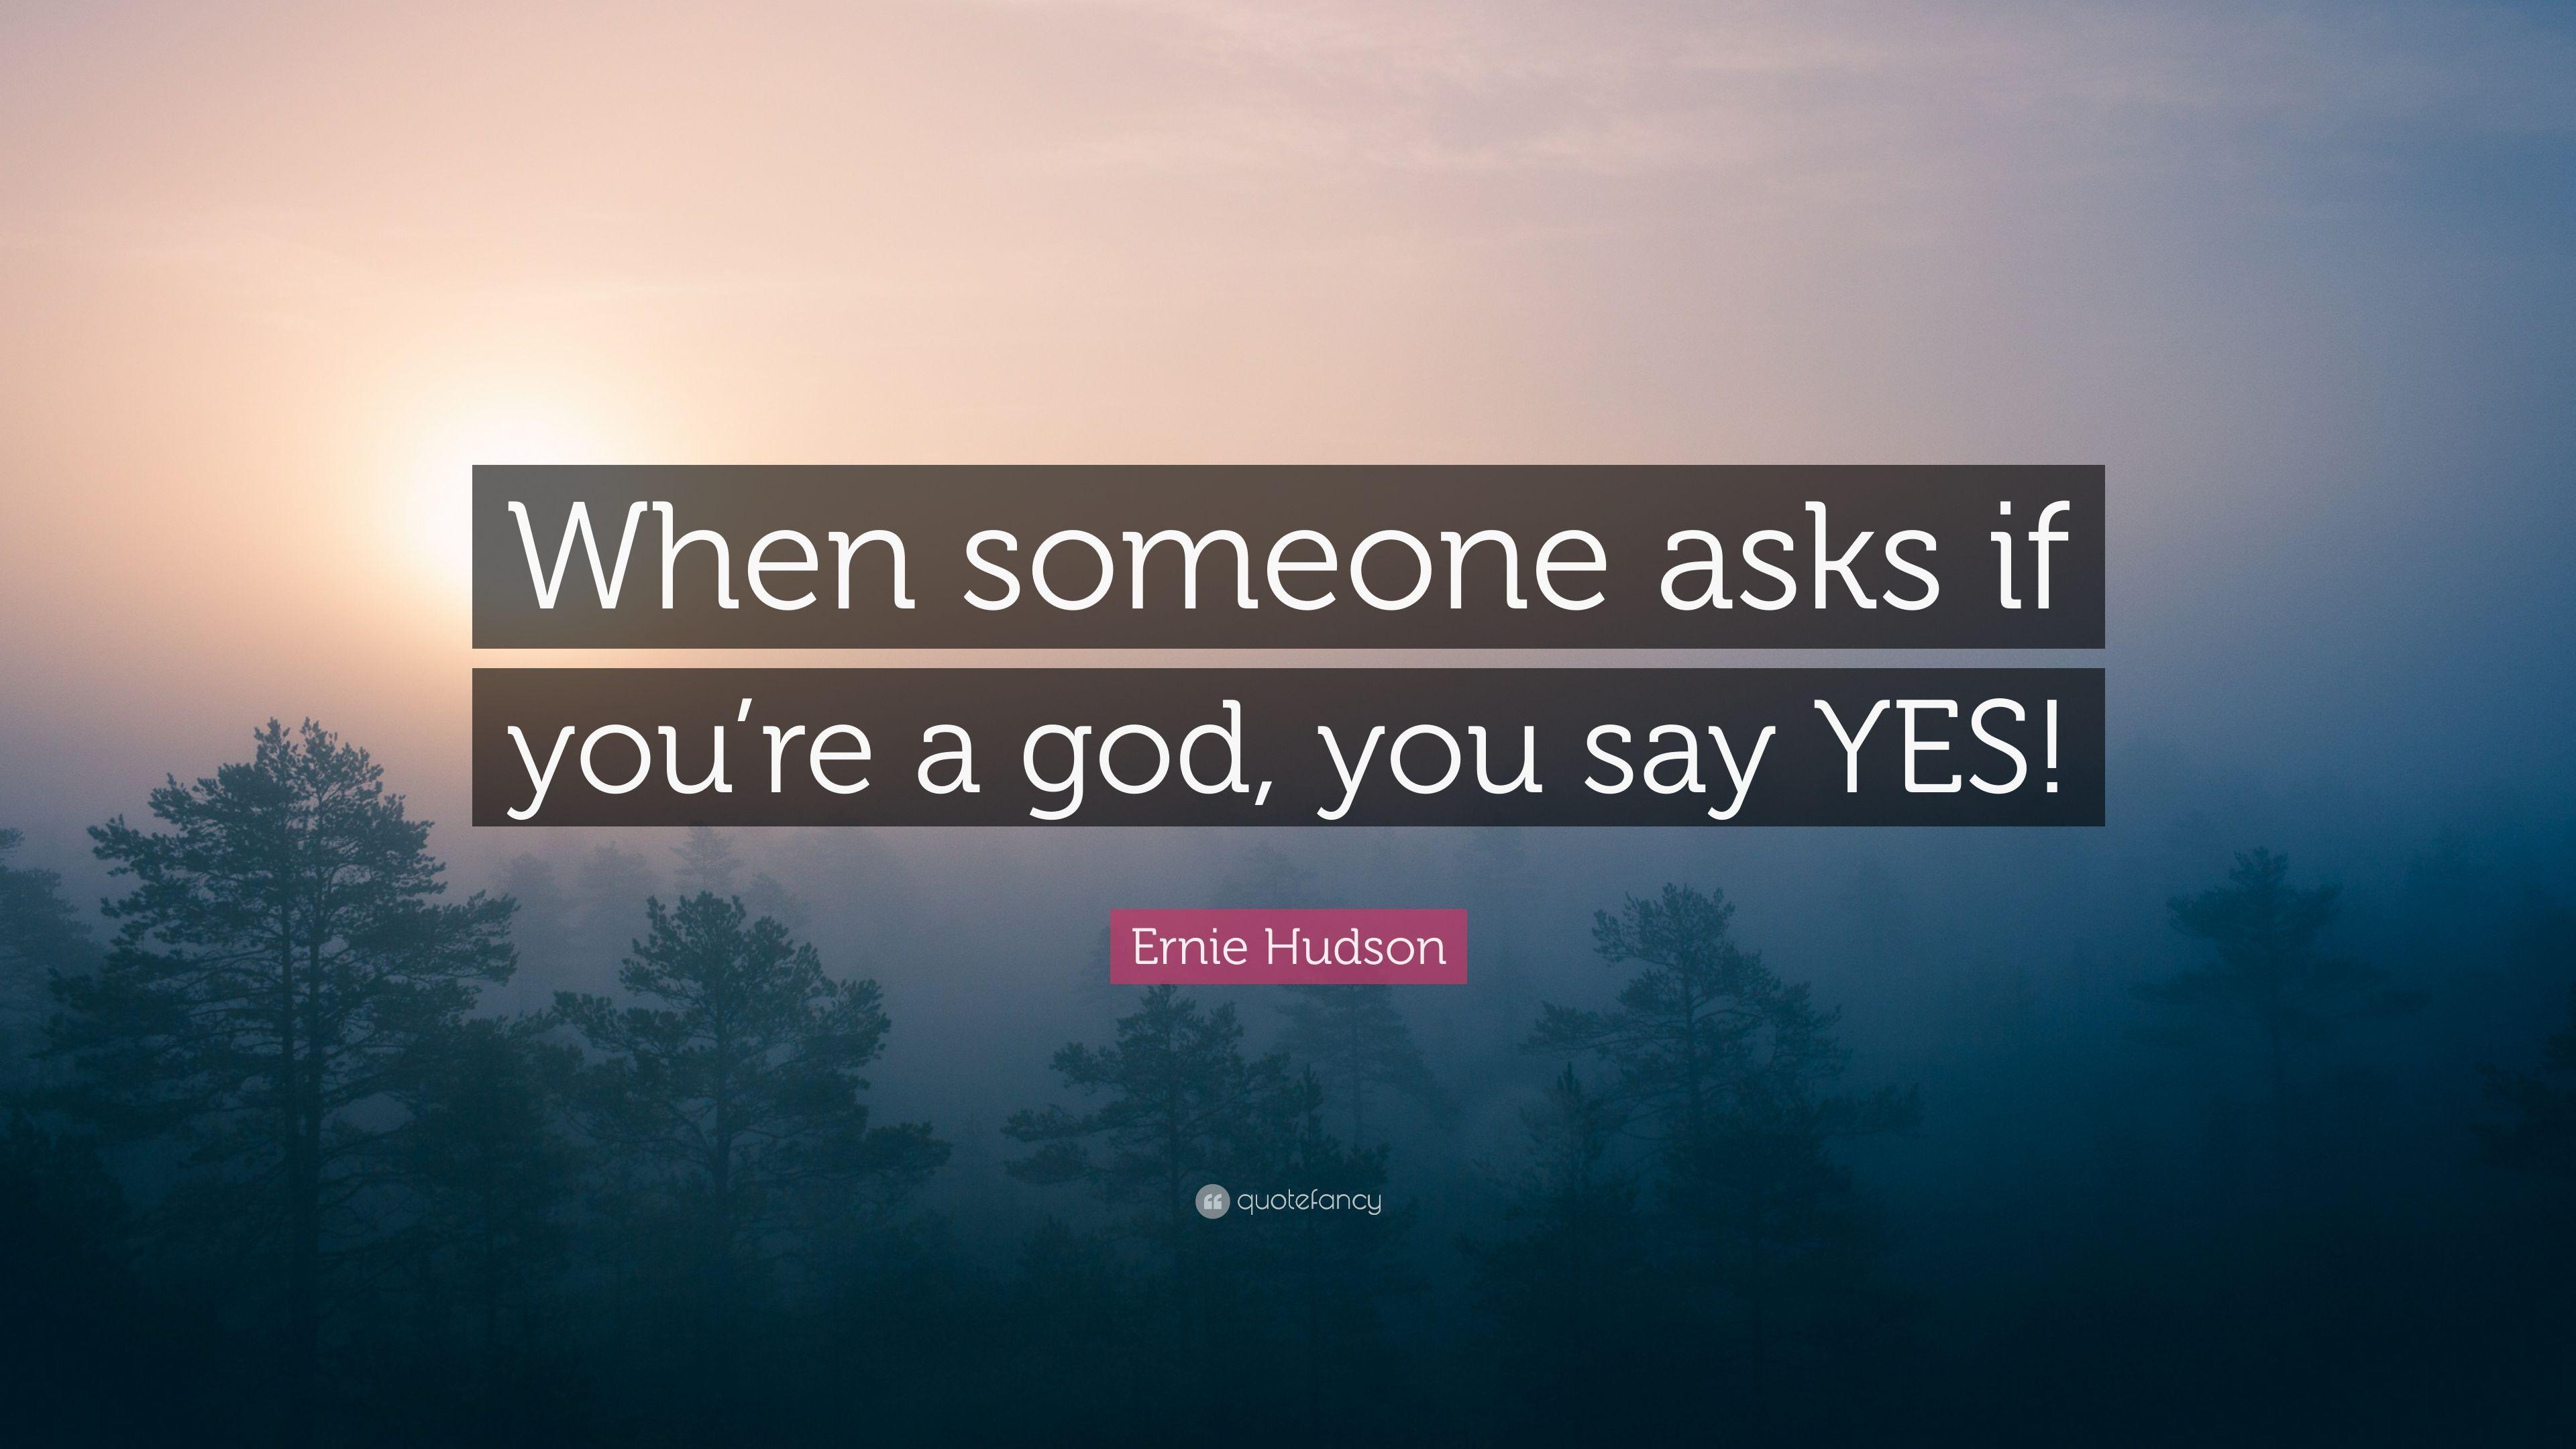 Ernie Hudson Quote: "When someone asks if you're a god, you say.